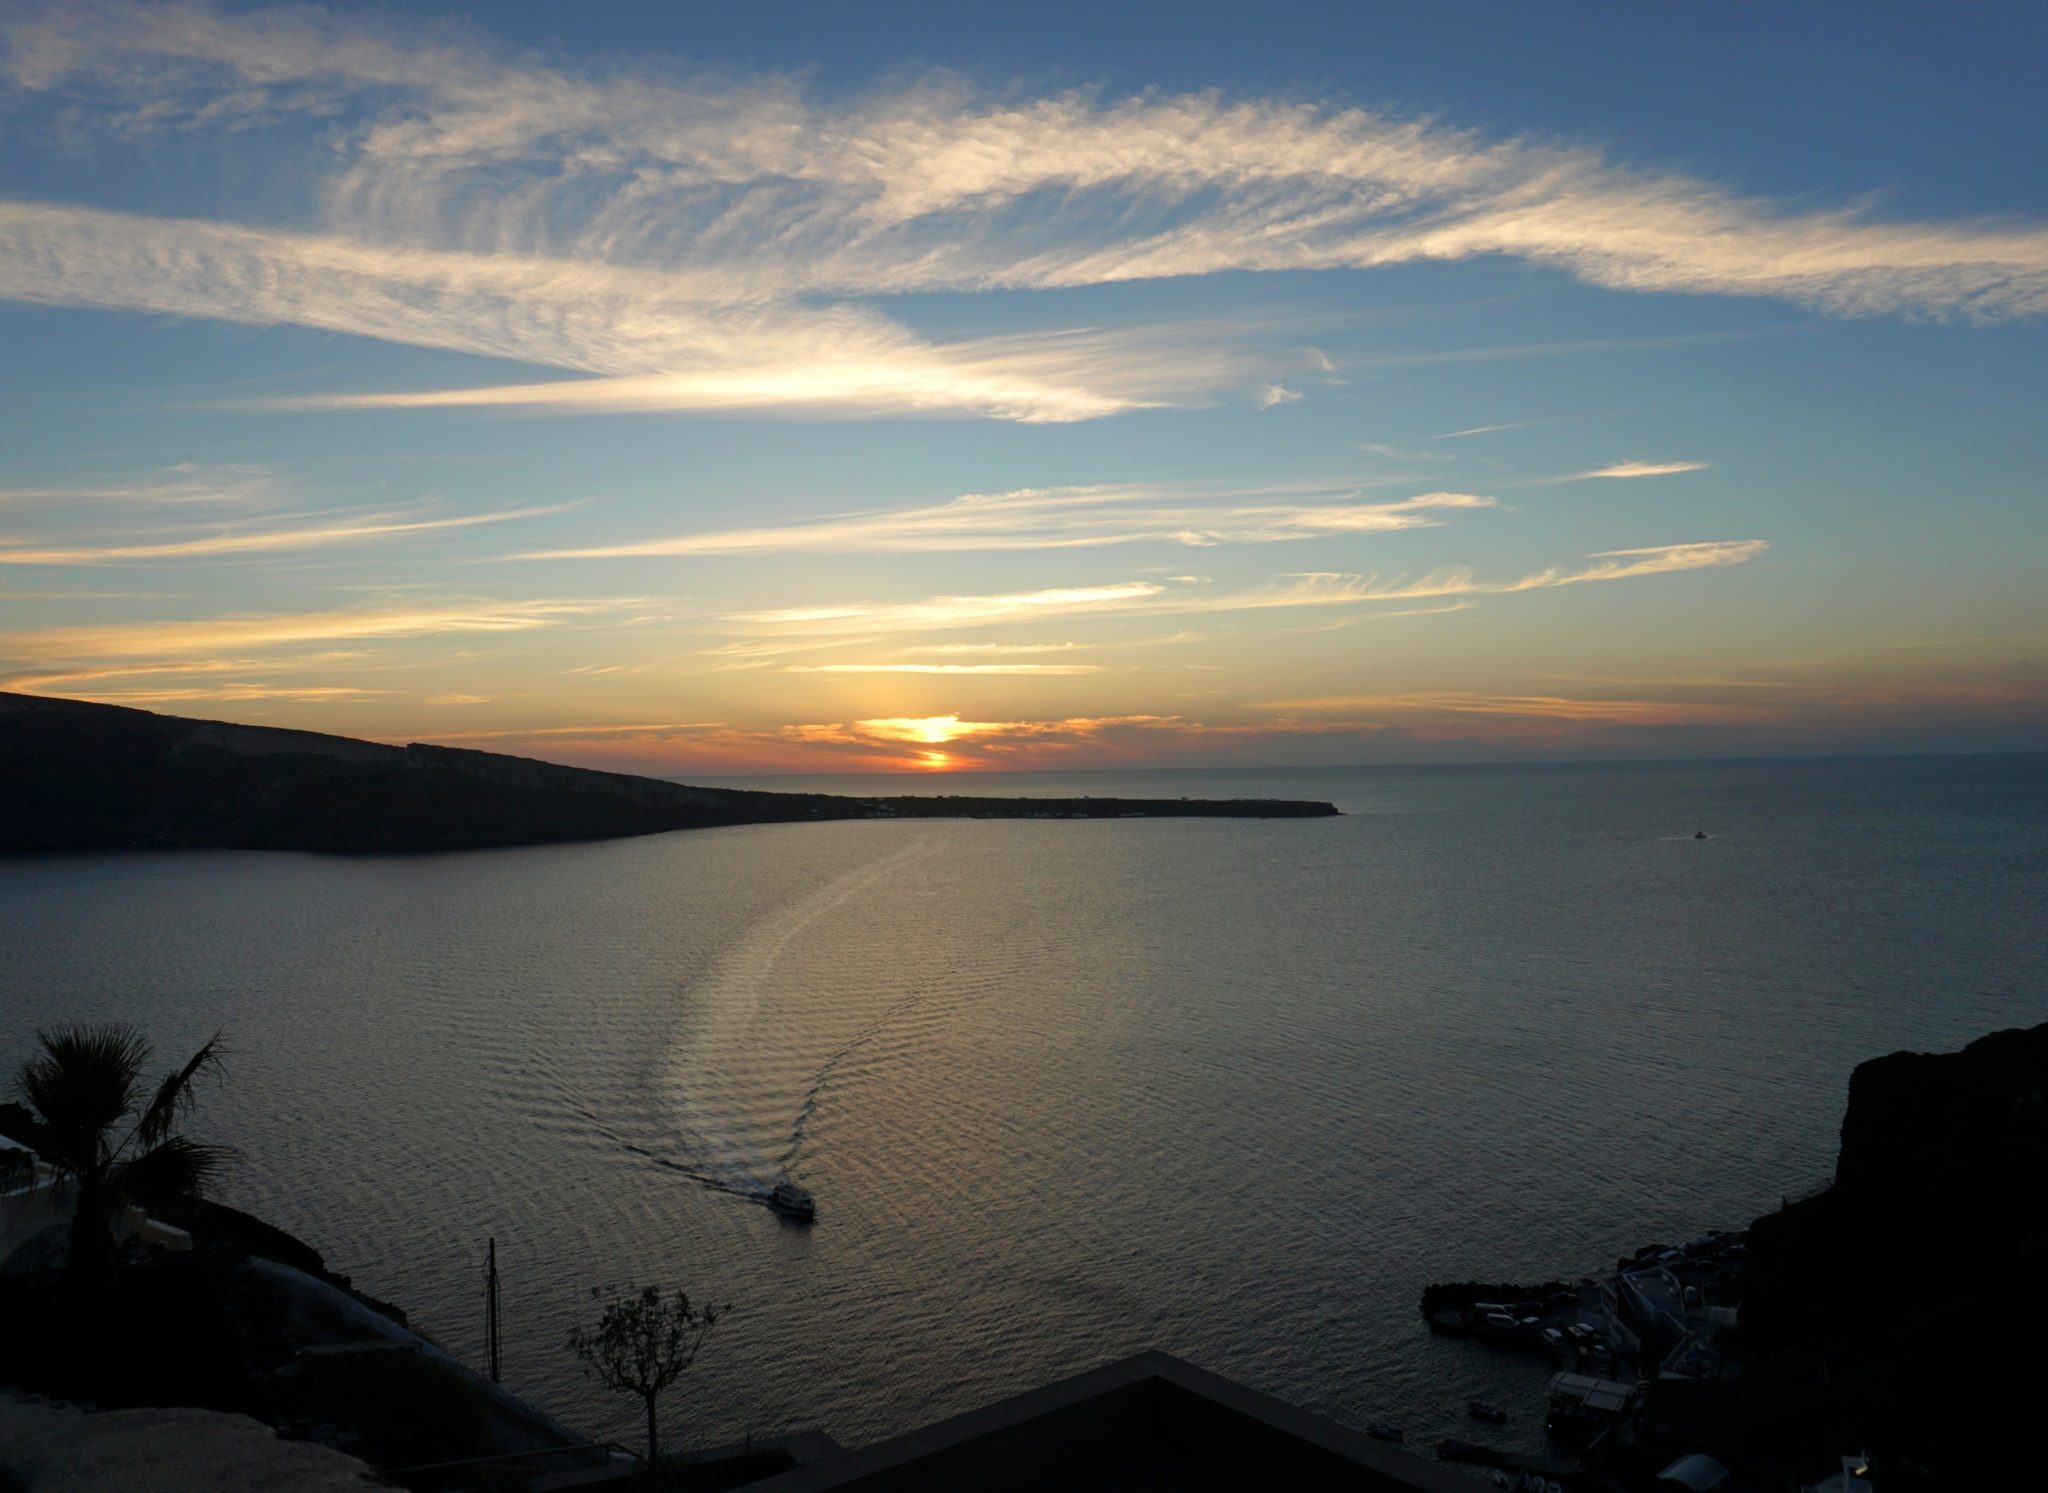 Watching the sunset in Oia from the steps down to Amoudi Bay. A reward for doing the Fira to Oia hike.